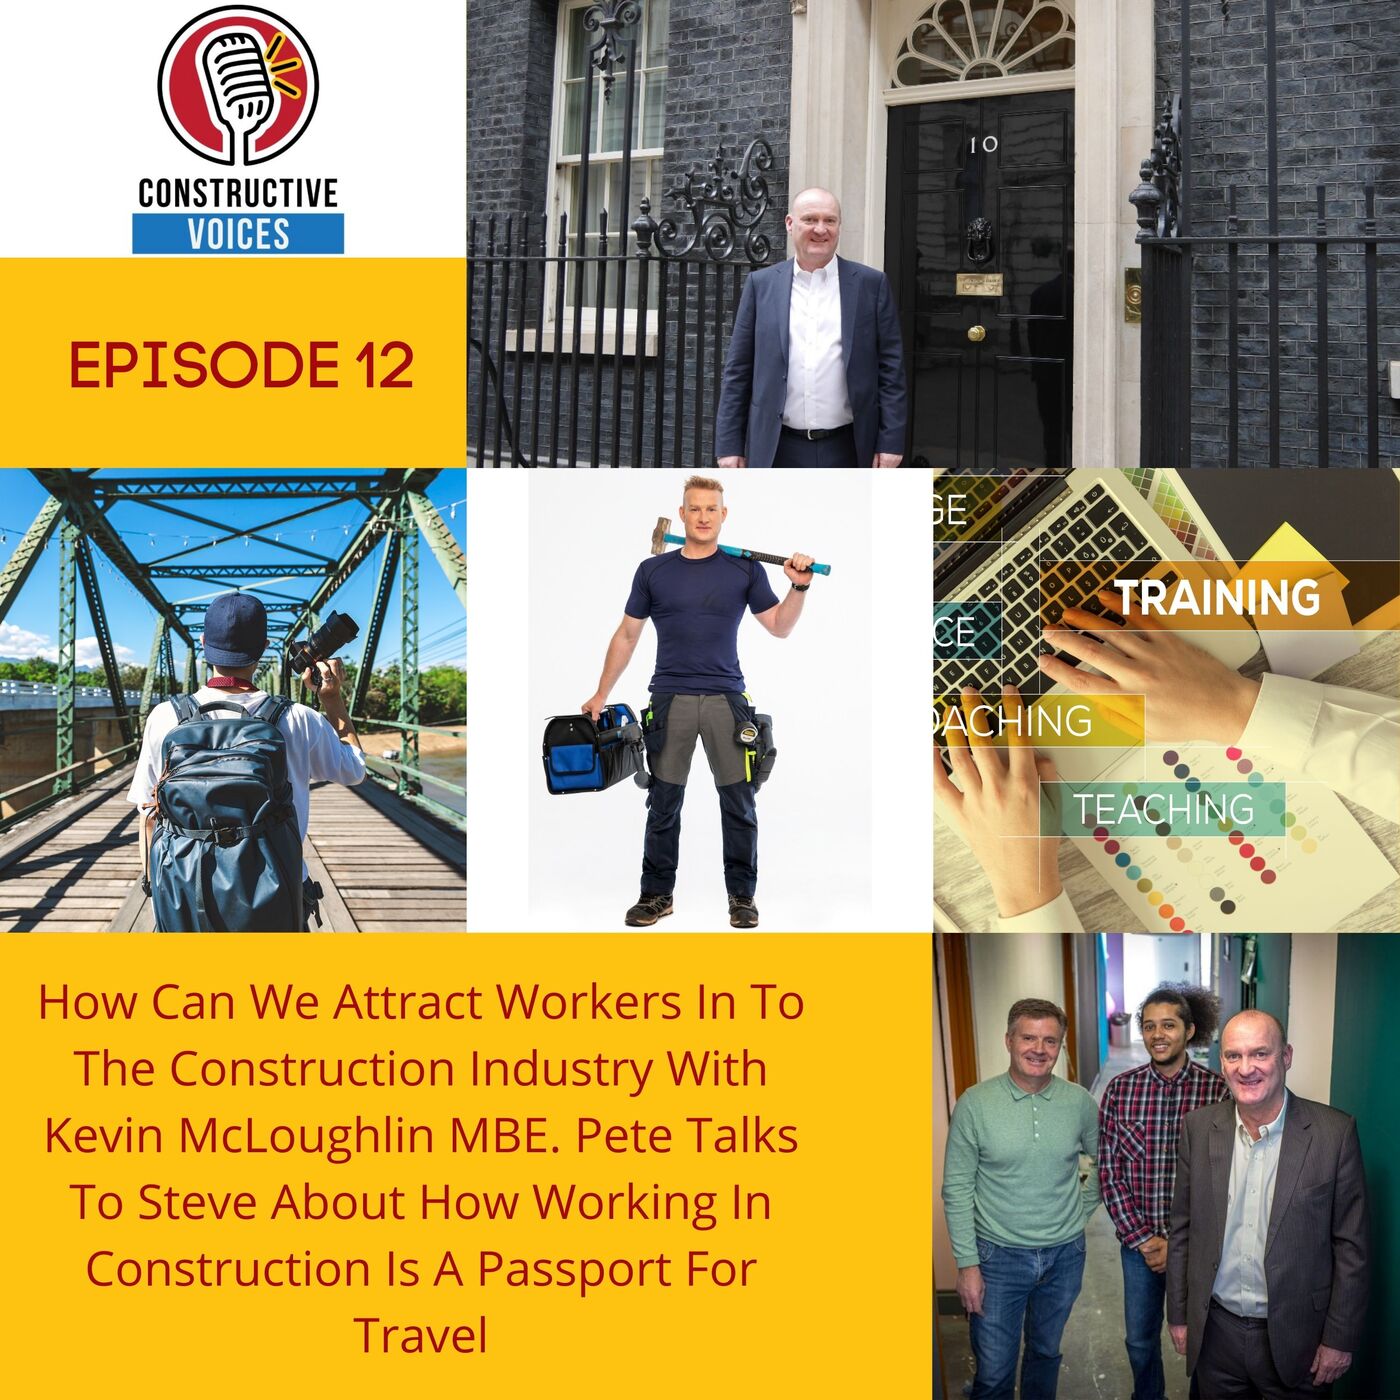 How Can We Attract Workers To The Construction Industry With Kevin McLoughlin MBE. Pete On Travel & Construction